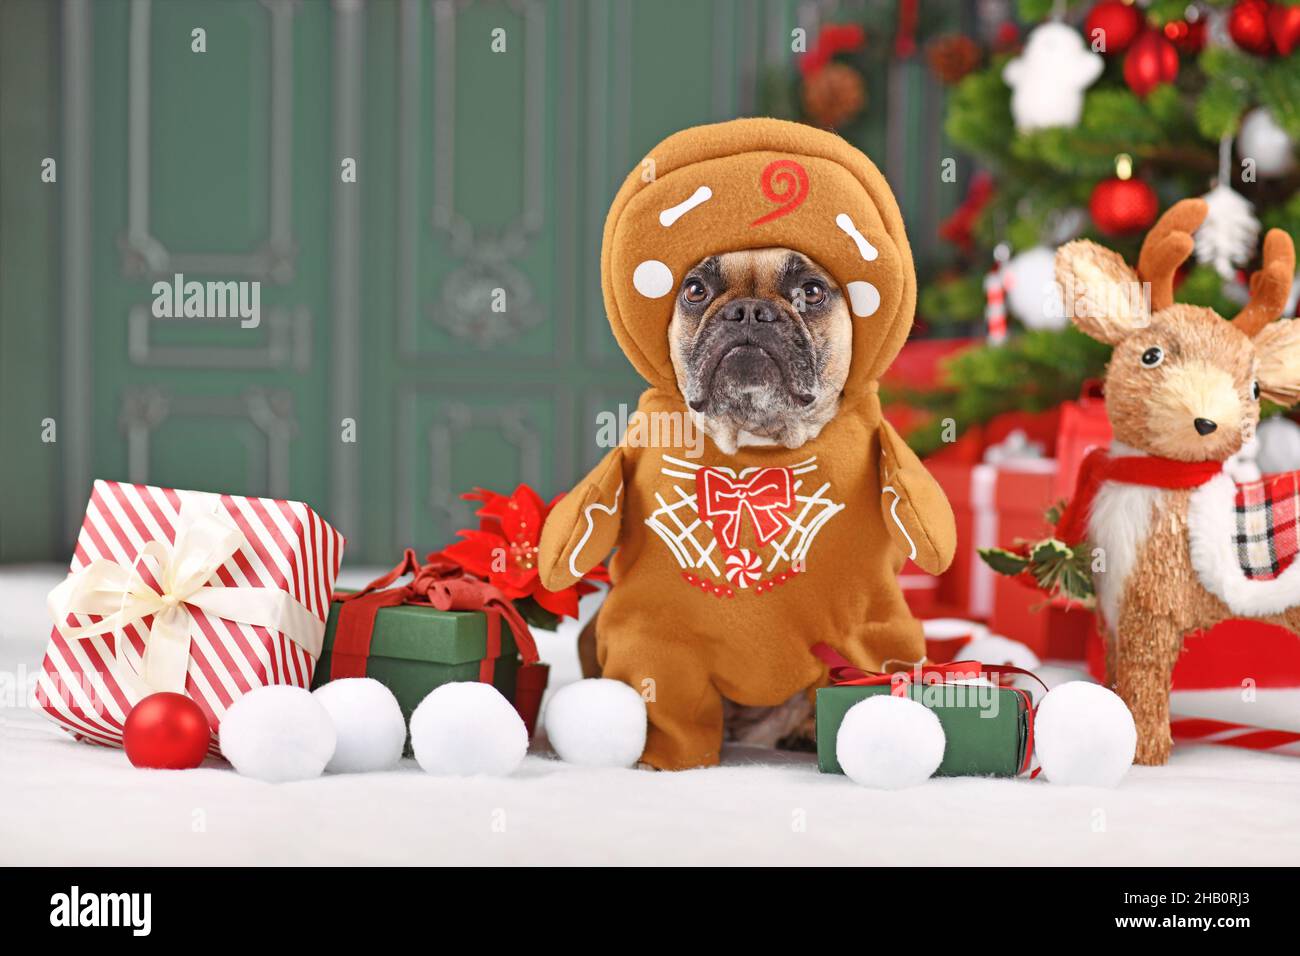 Dog wearing Christmas costume. French Bulldog dressed up as gingerbread man with arms surrounded by festive decoration Stock Photo